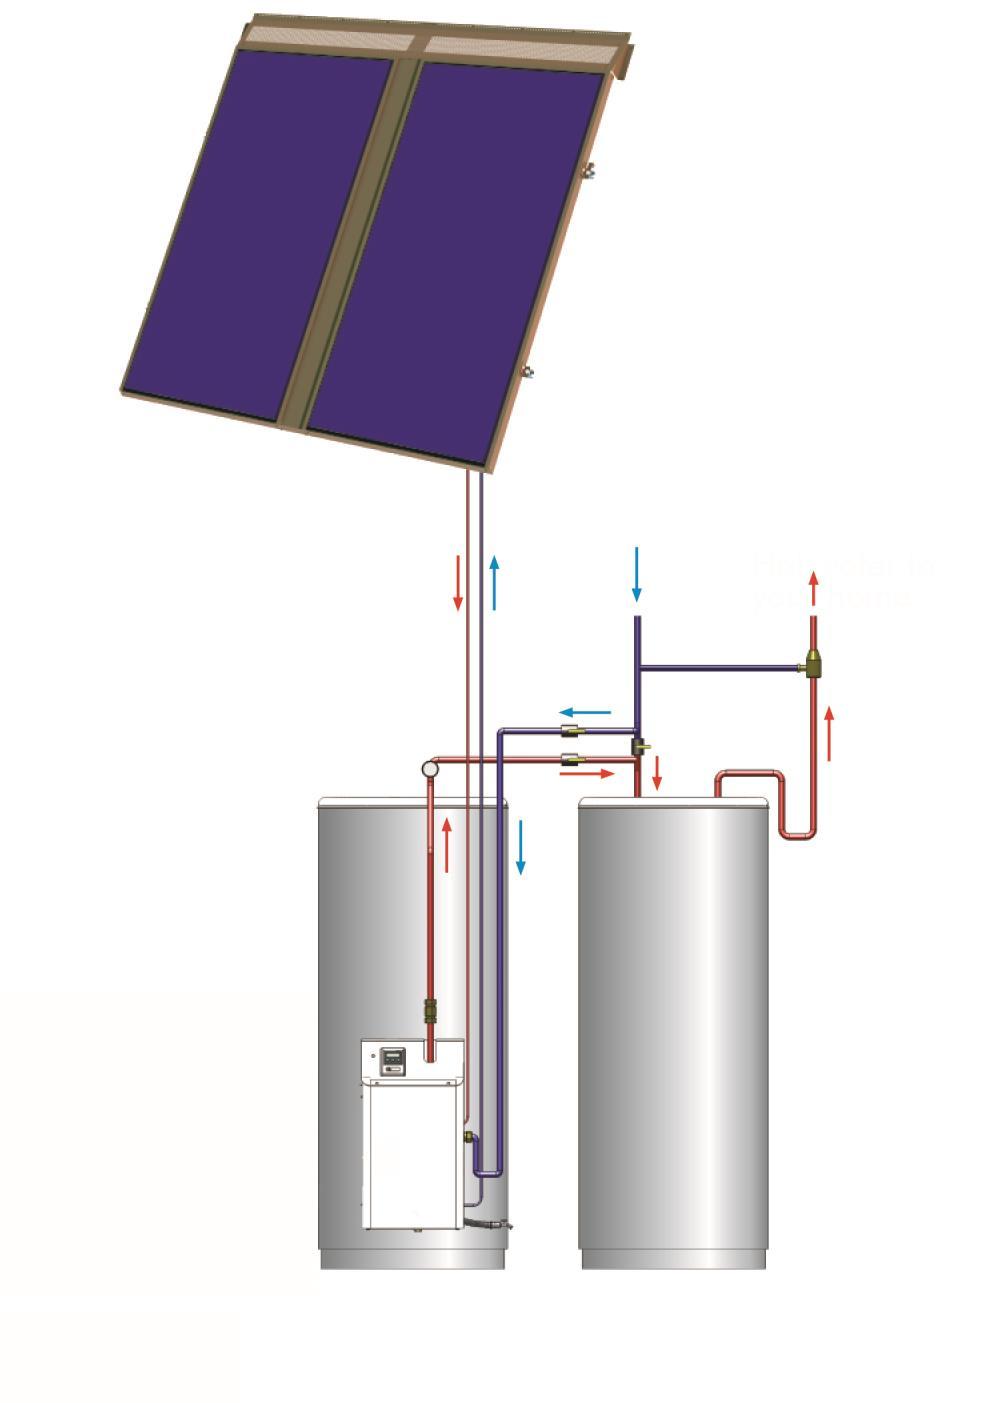 2.2 Appliance schematic 1 Solar collectors (1 to 4) 2 Line-set roof-penetration (behind flashing) 1 2 3 4 Heat transfer fluid line from collectors to Energy Station (red carries hot fluid) Heat